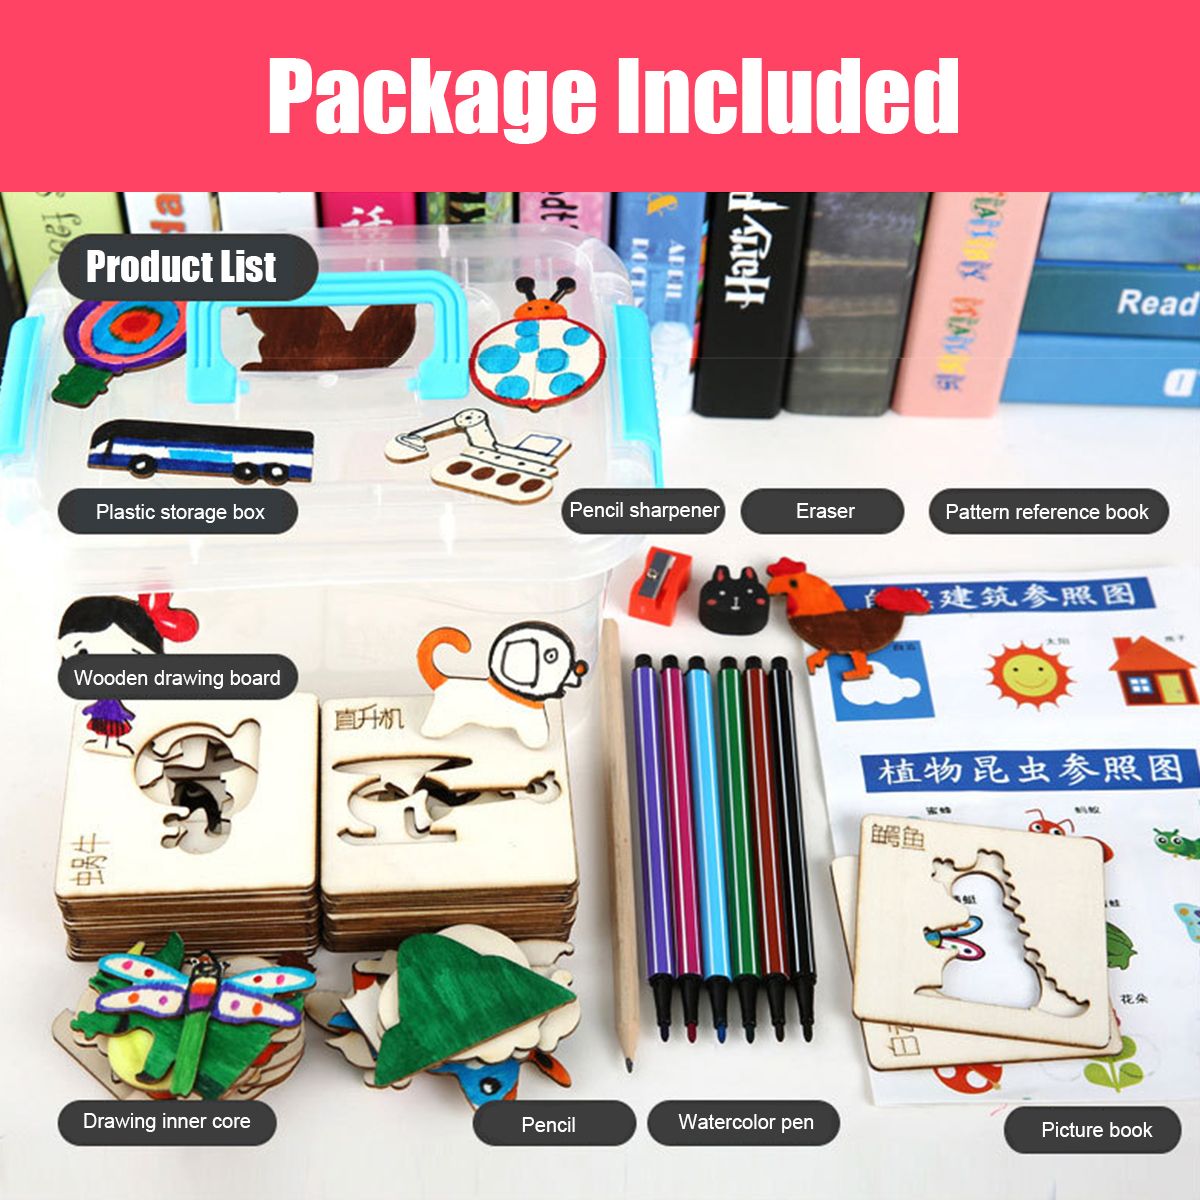 243660x-Color-Painting-Tools-Kit-Painting-Template-Graffiti-Kid-Handmade-Wooden-Toy-1658630